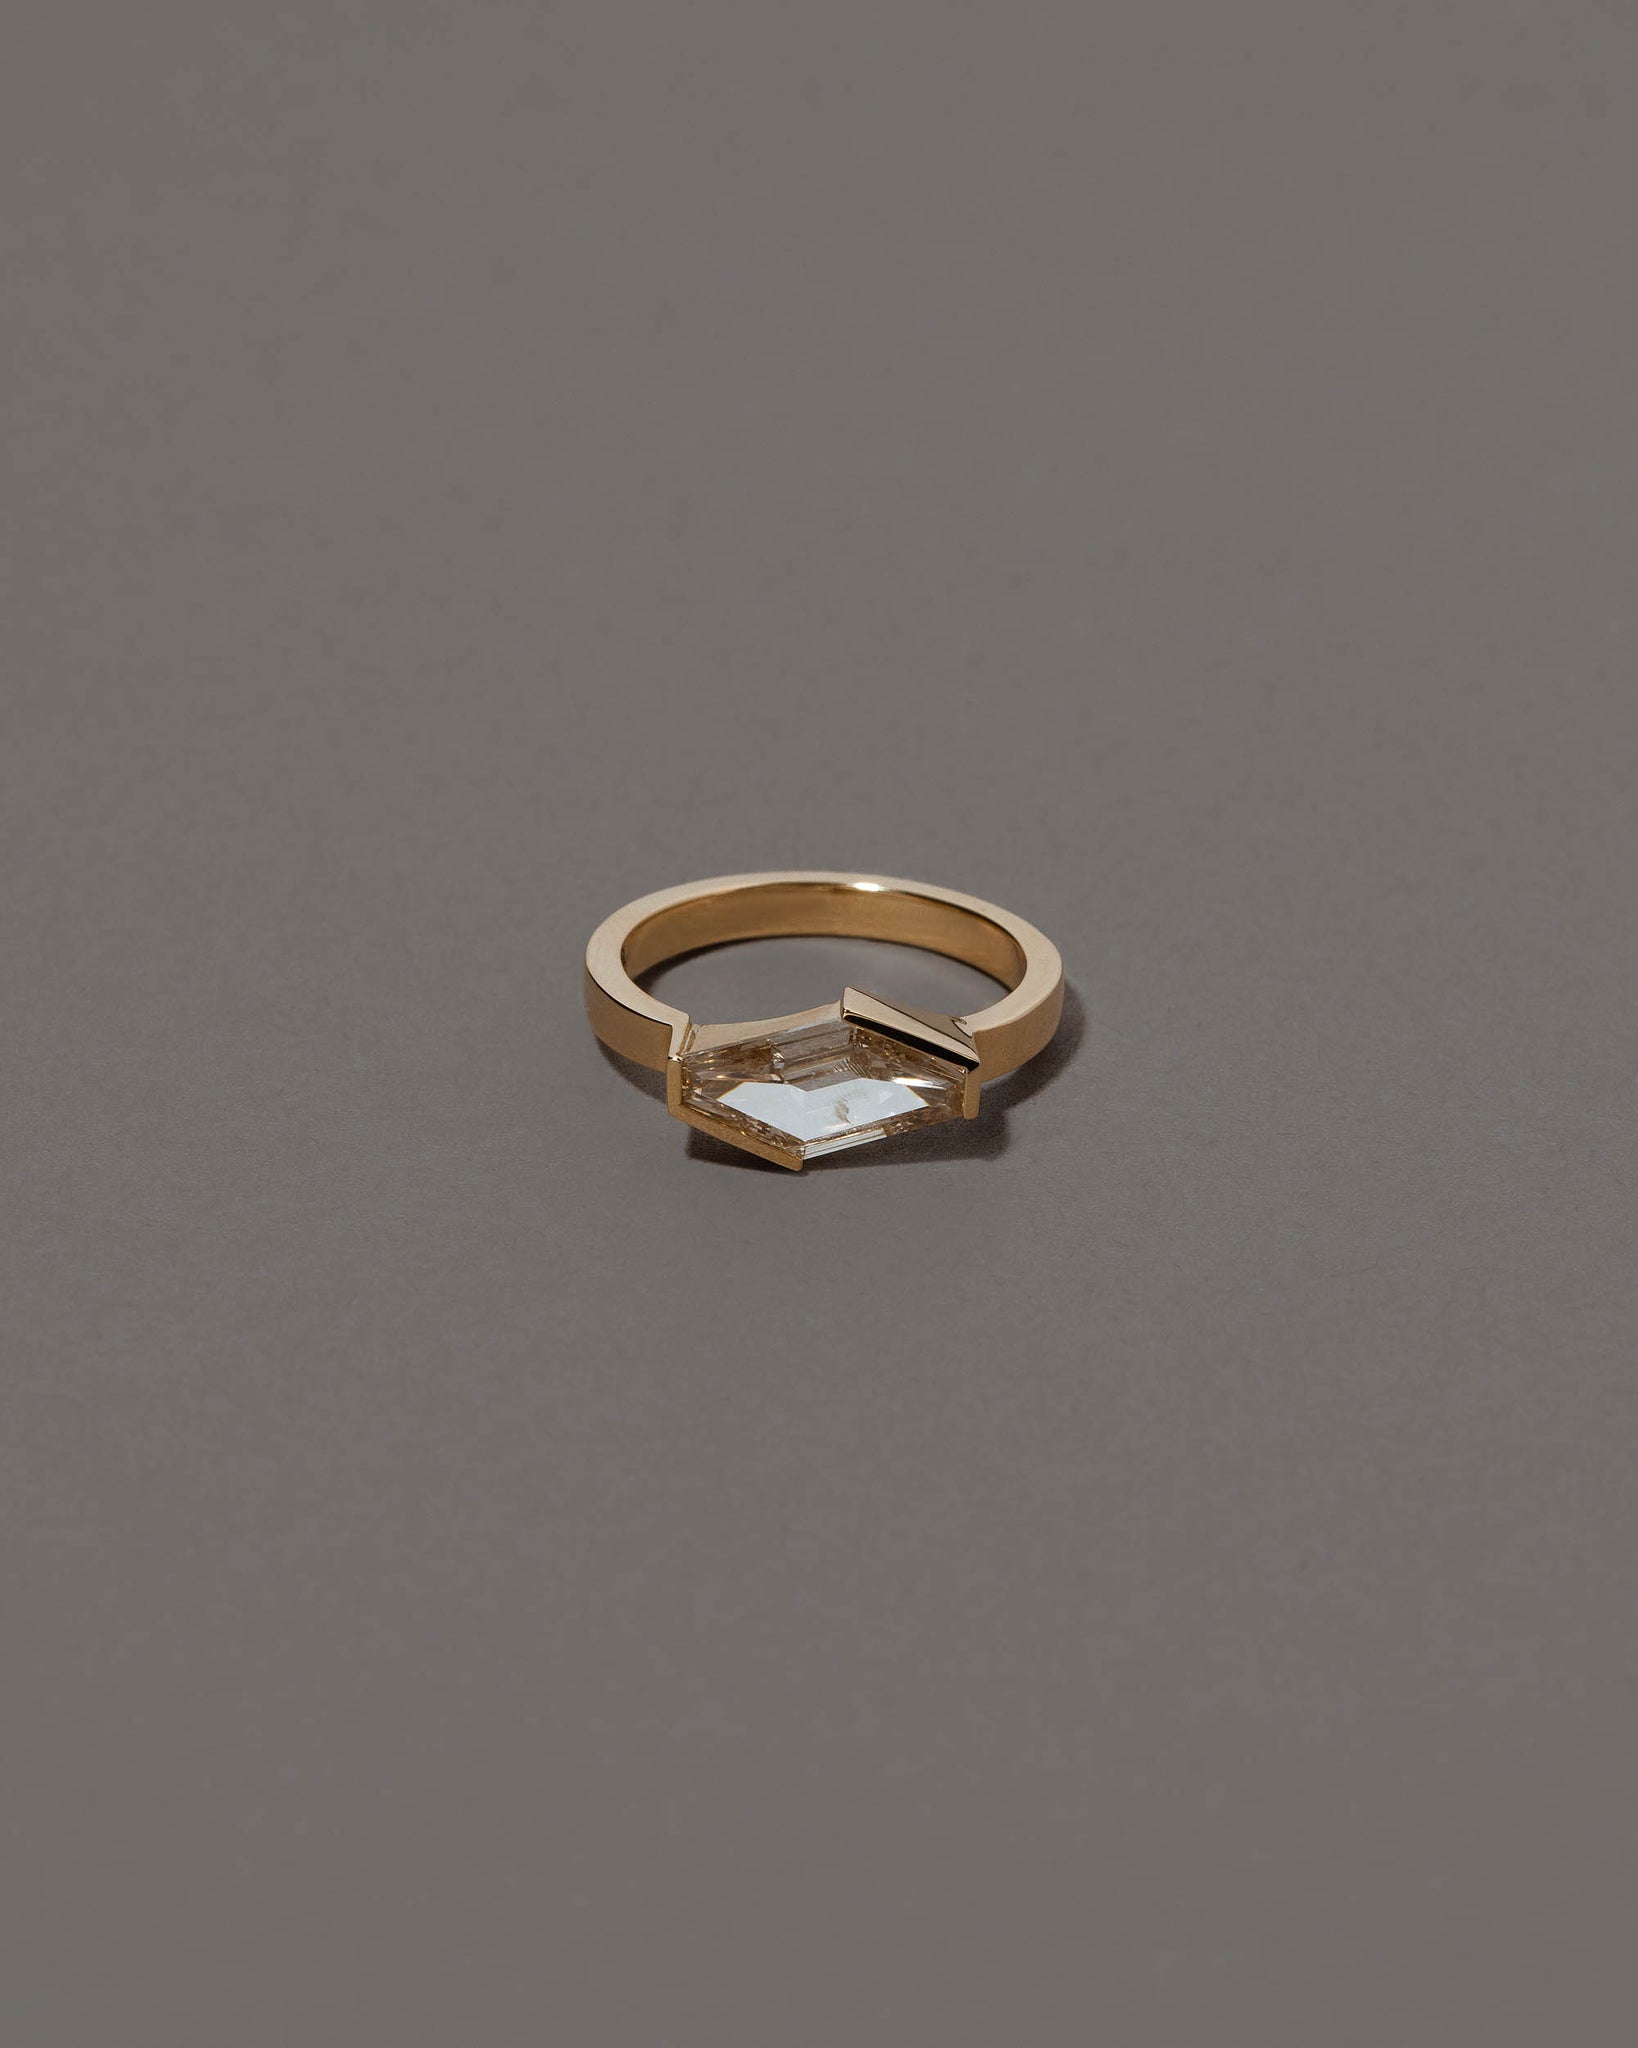 Mirth Ring on grey color background.